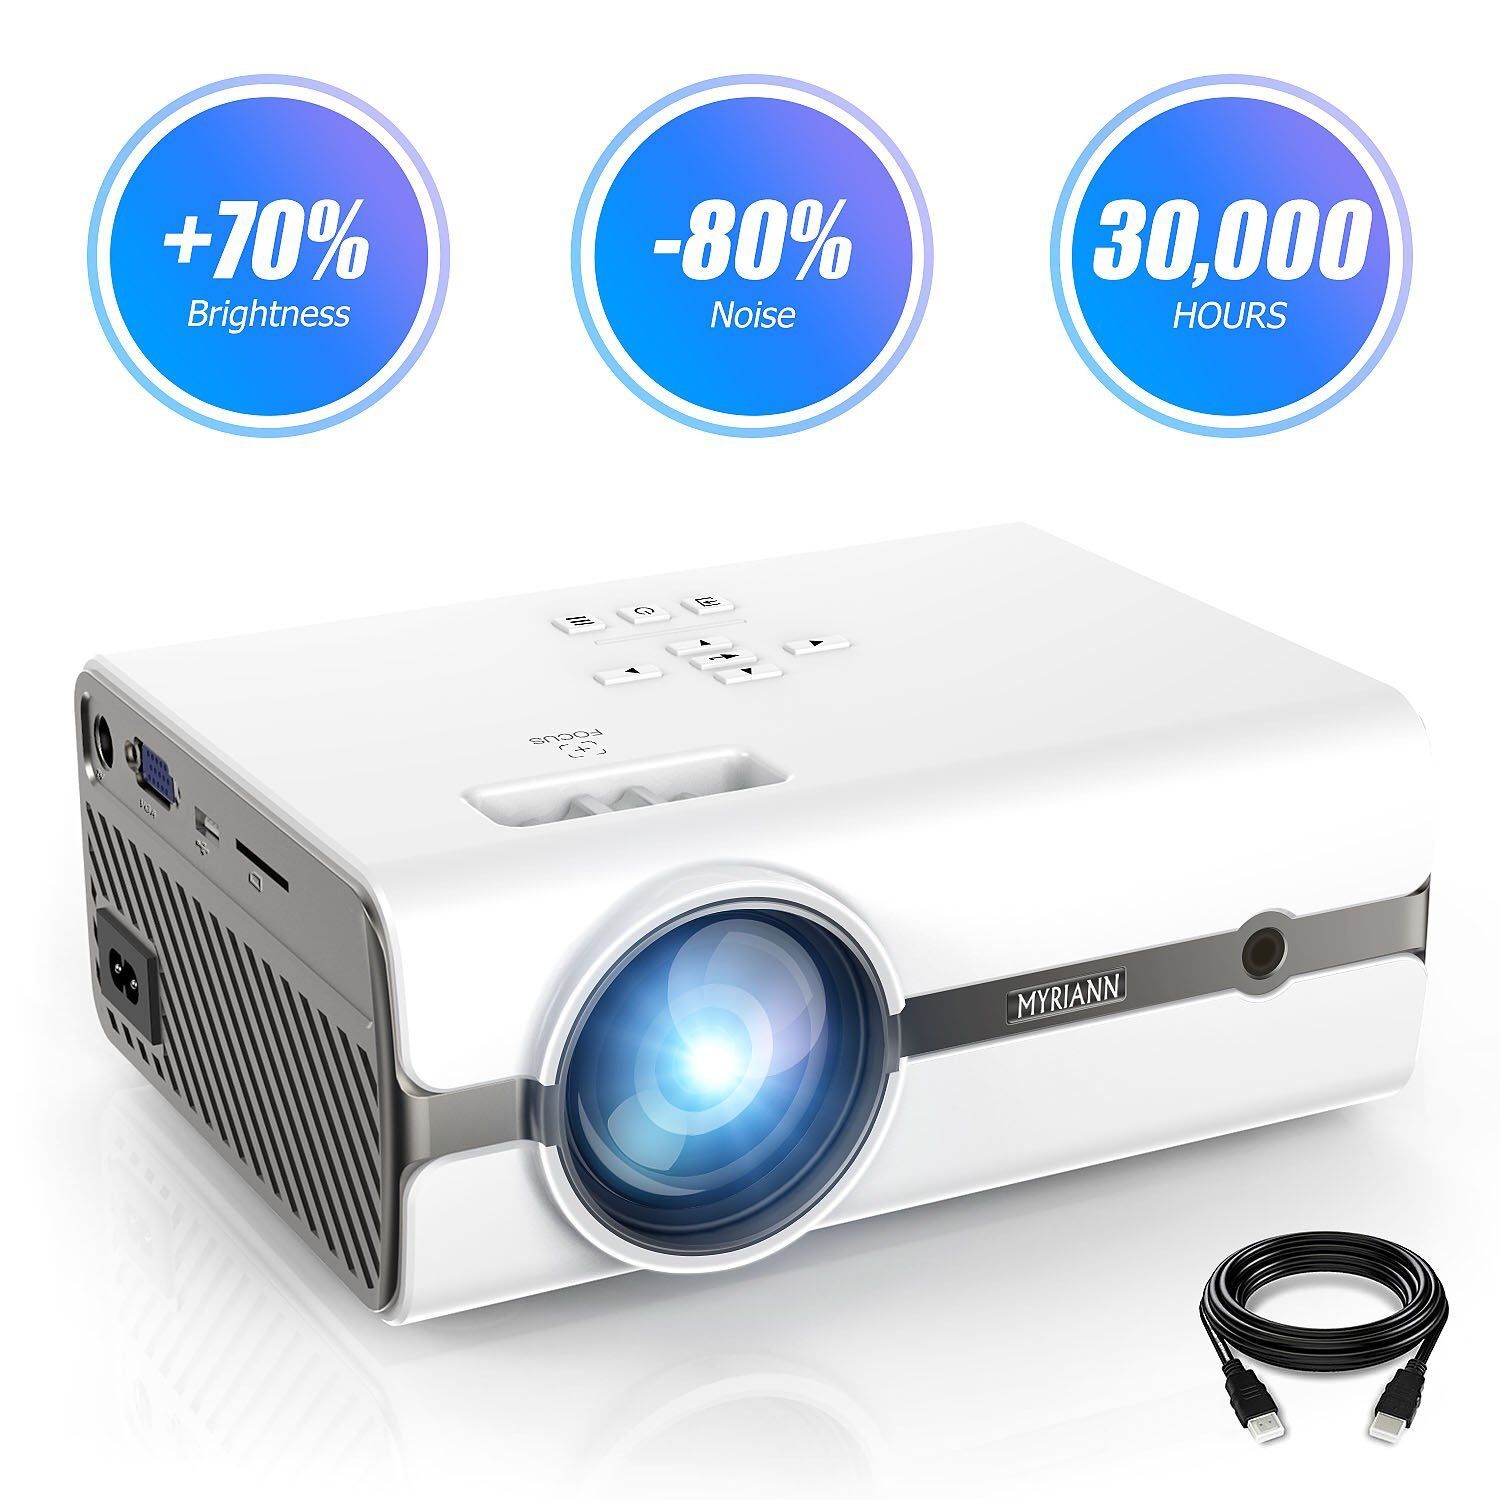 Projector, Myriann Portable Mini Multimedia Home Video LCD Projector Support 1080P for Home Theatre Support HD 1080P HDMI VGA AV USB Laptop iPhone/iP